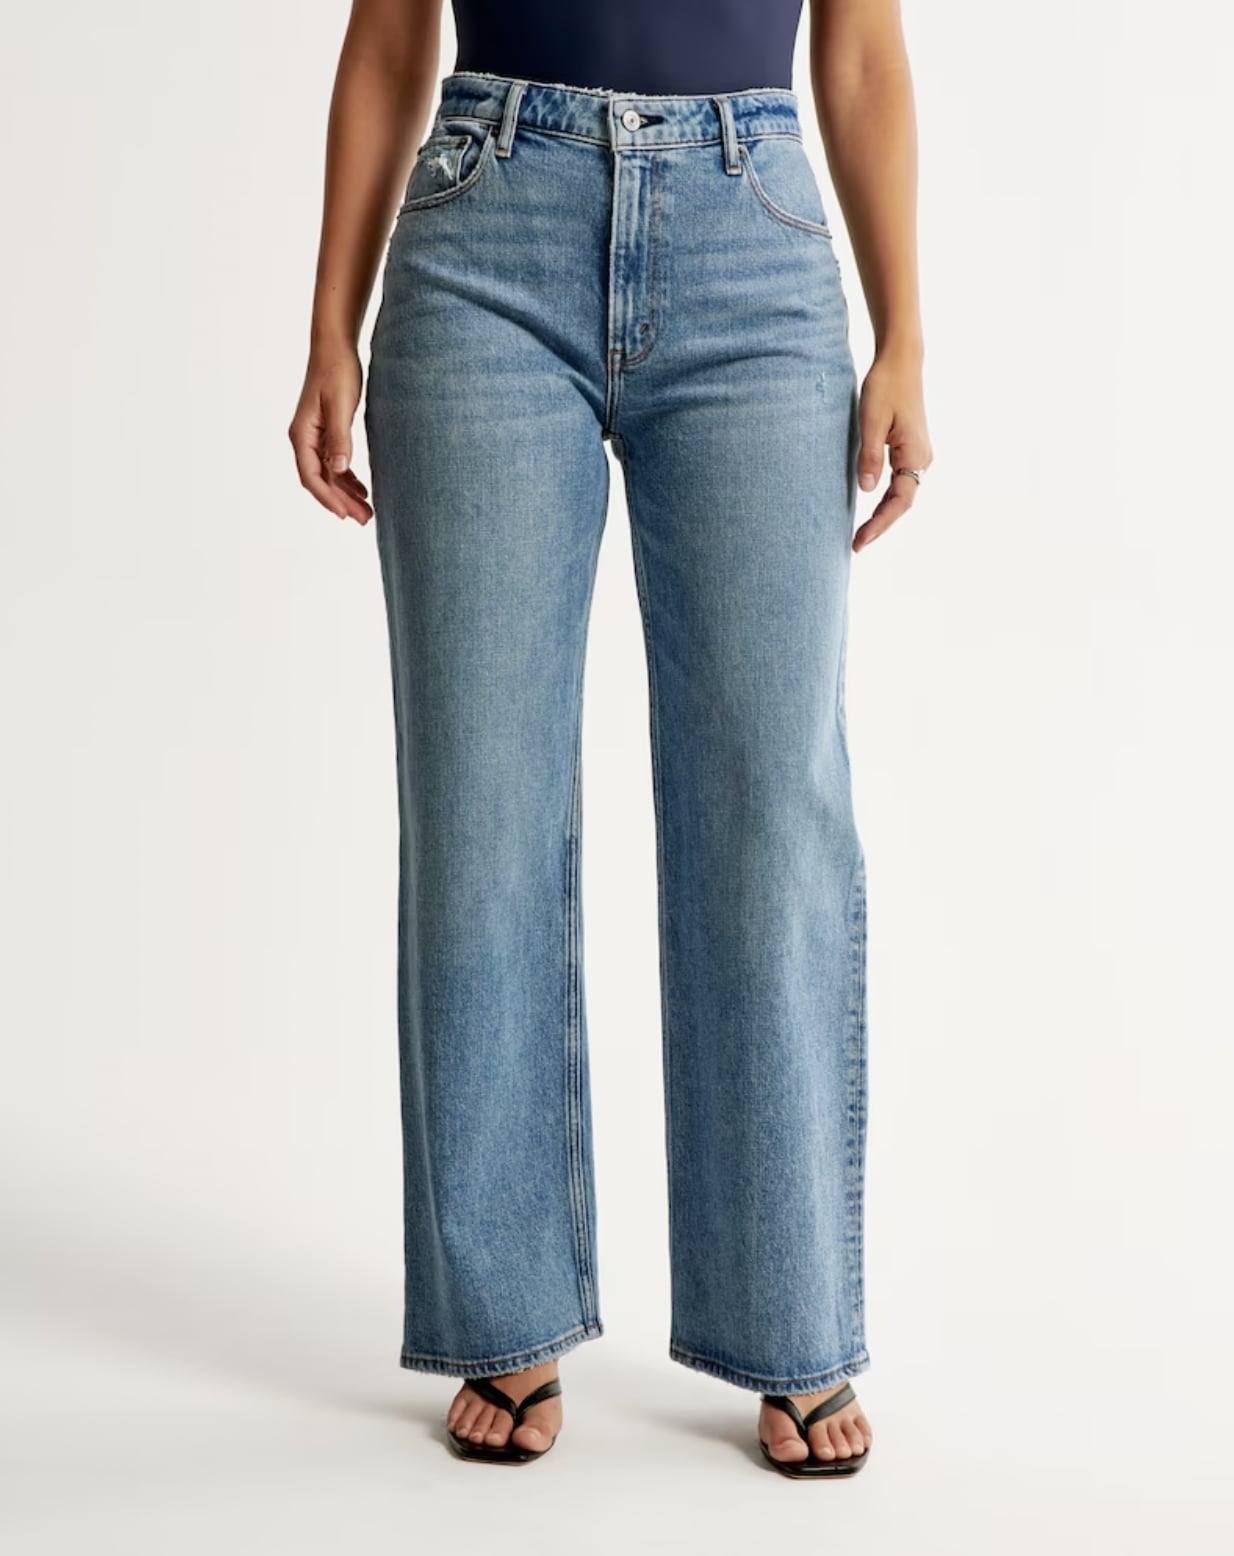 The 10 Best Jeans For Petite Women - From Boot-Cut Denim to High ...